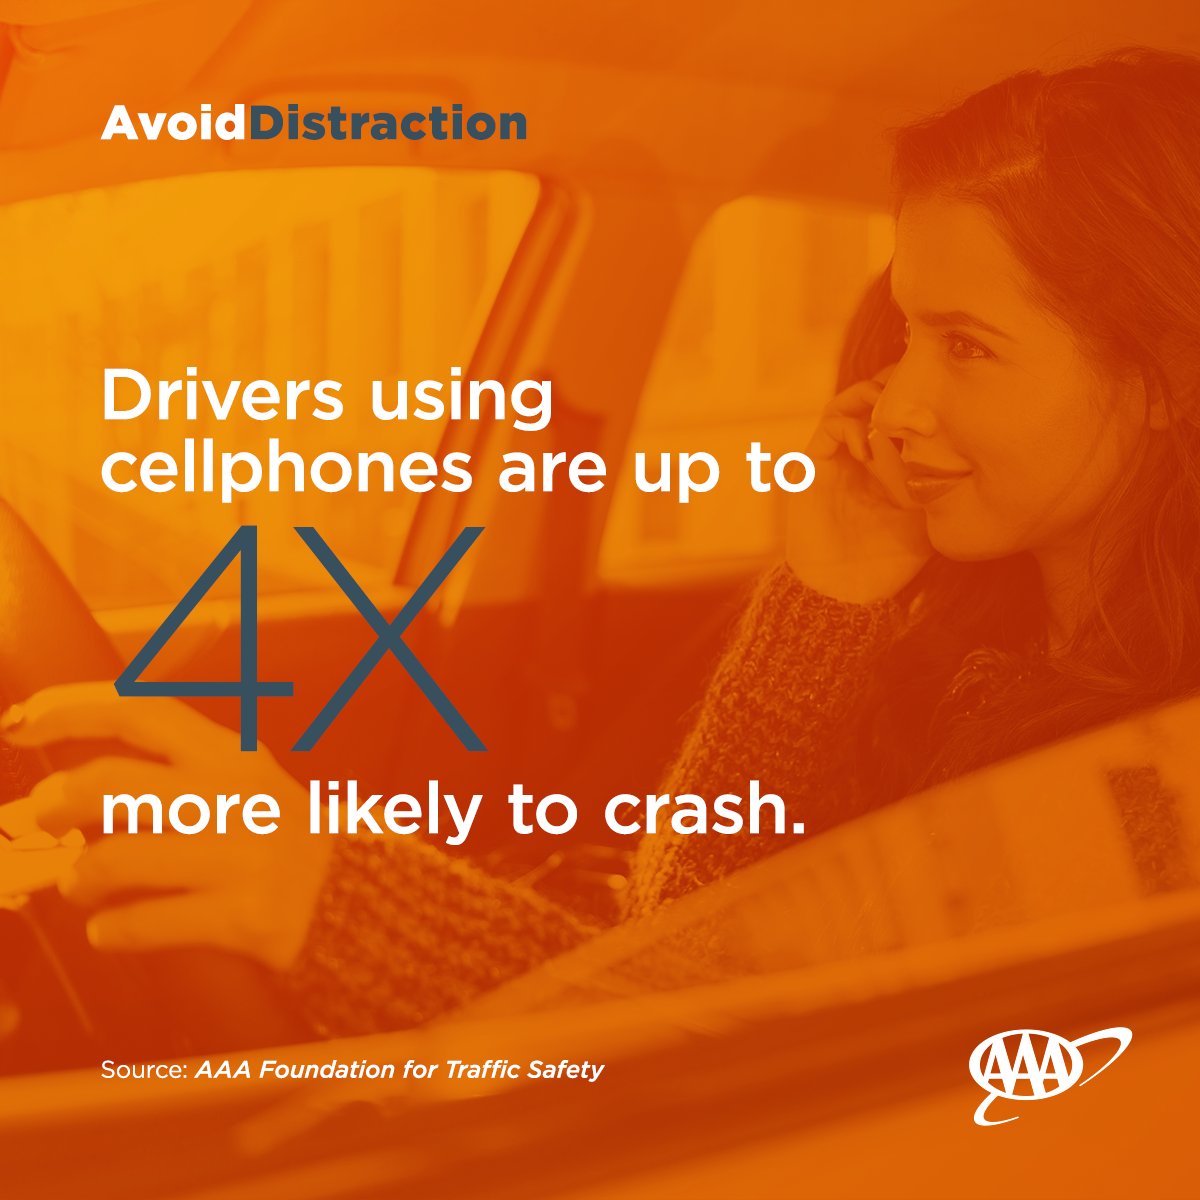 April is Distracted Driving Awareness Month. Familiarize yourself with your vehicle’s equipment features, set up hands-free functions, and secure mobile devices that may distract you while driving.